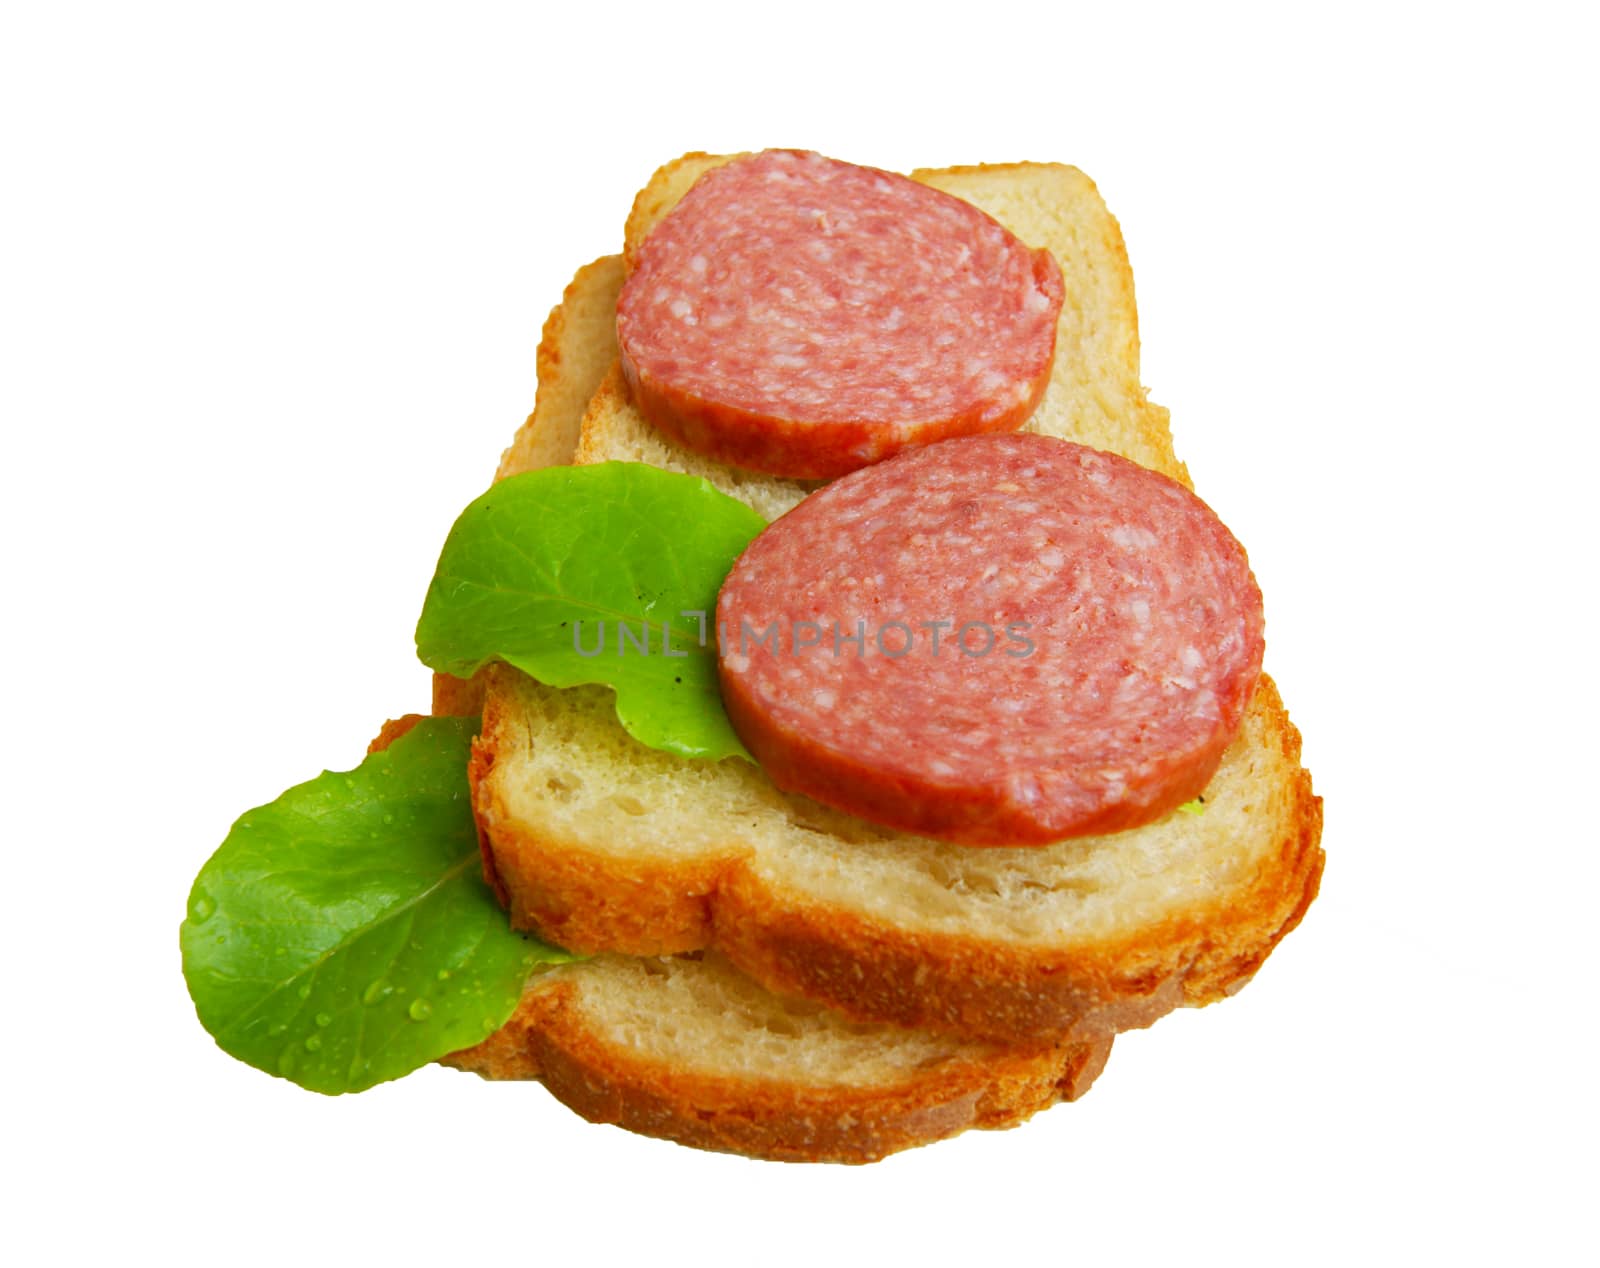 Bread and sausage on white by cobol1964